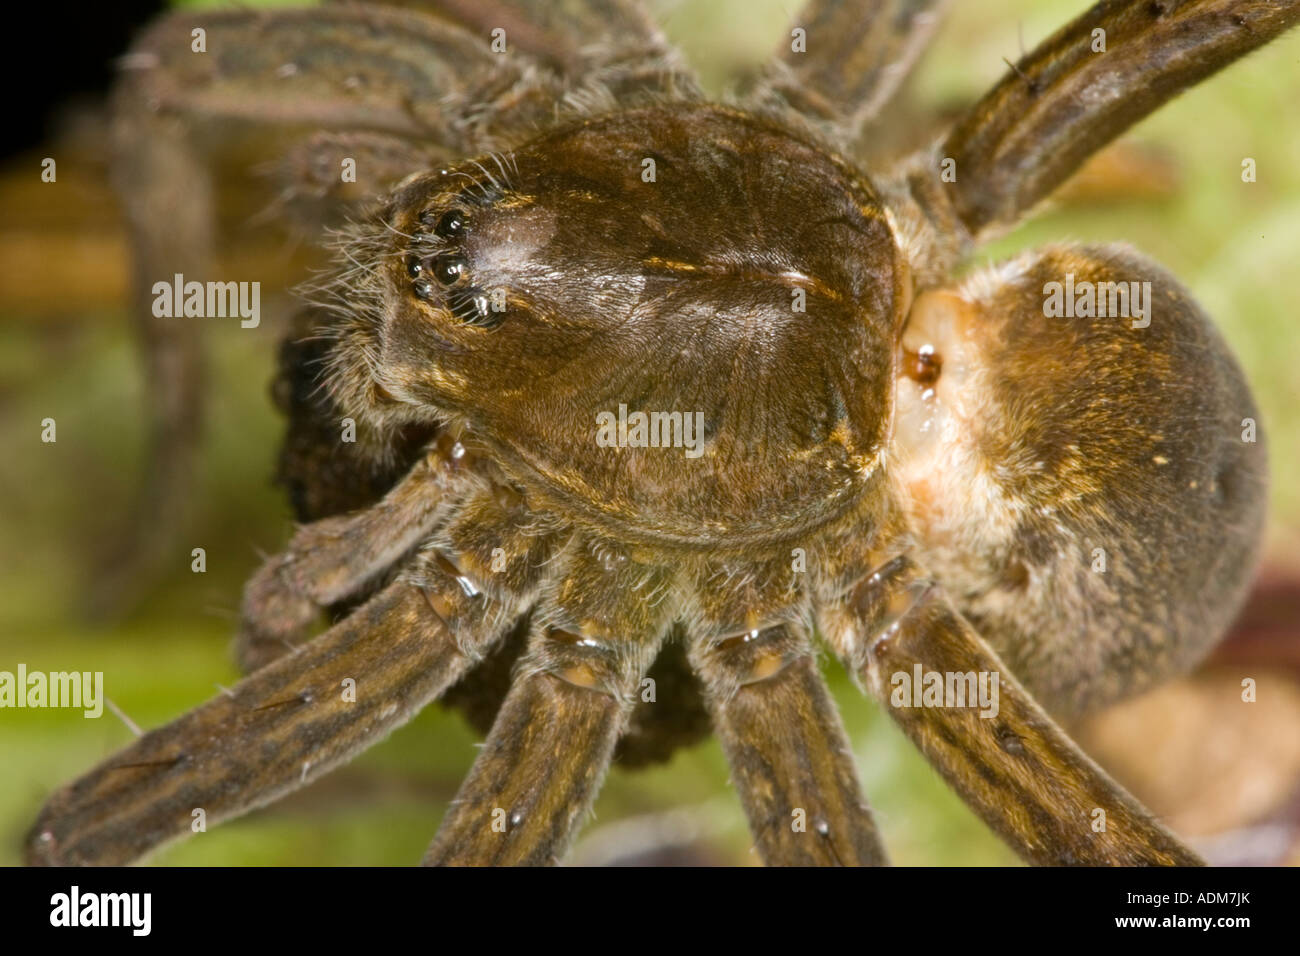 Close up of unstriped form of female Fen Raft Spider (Dolomedes plantarius) carrying mature egg sac. Stock Photo